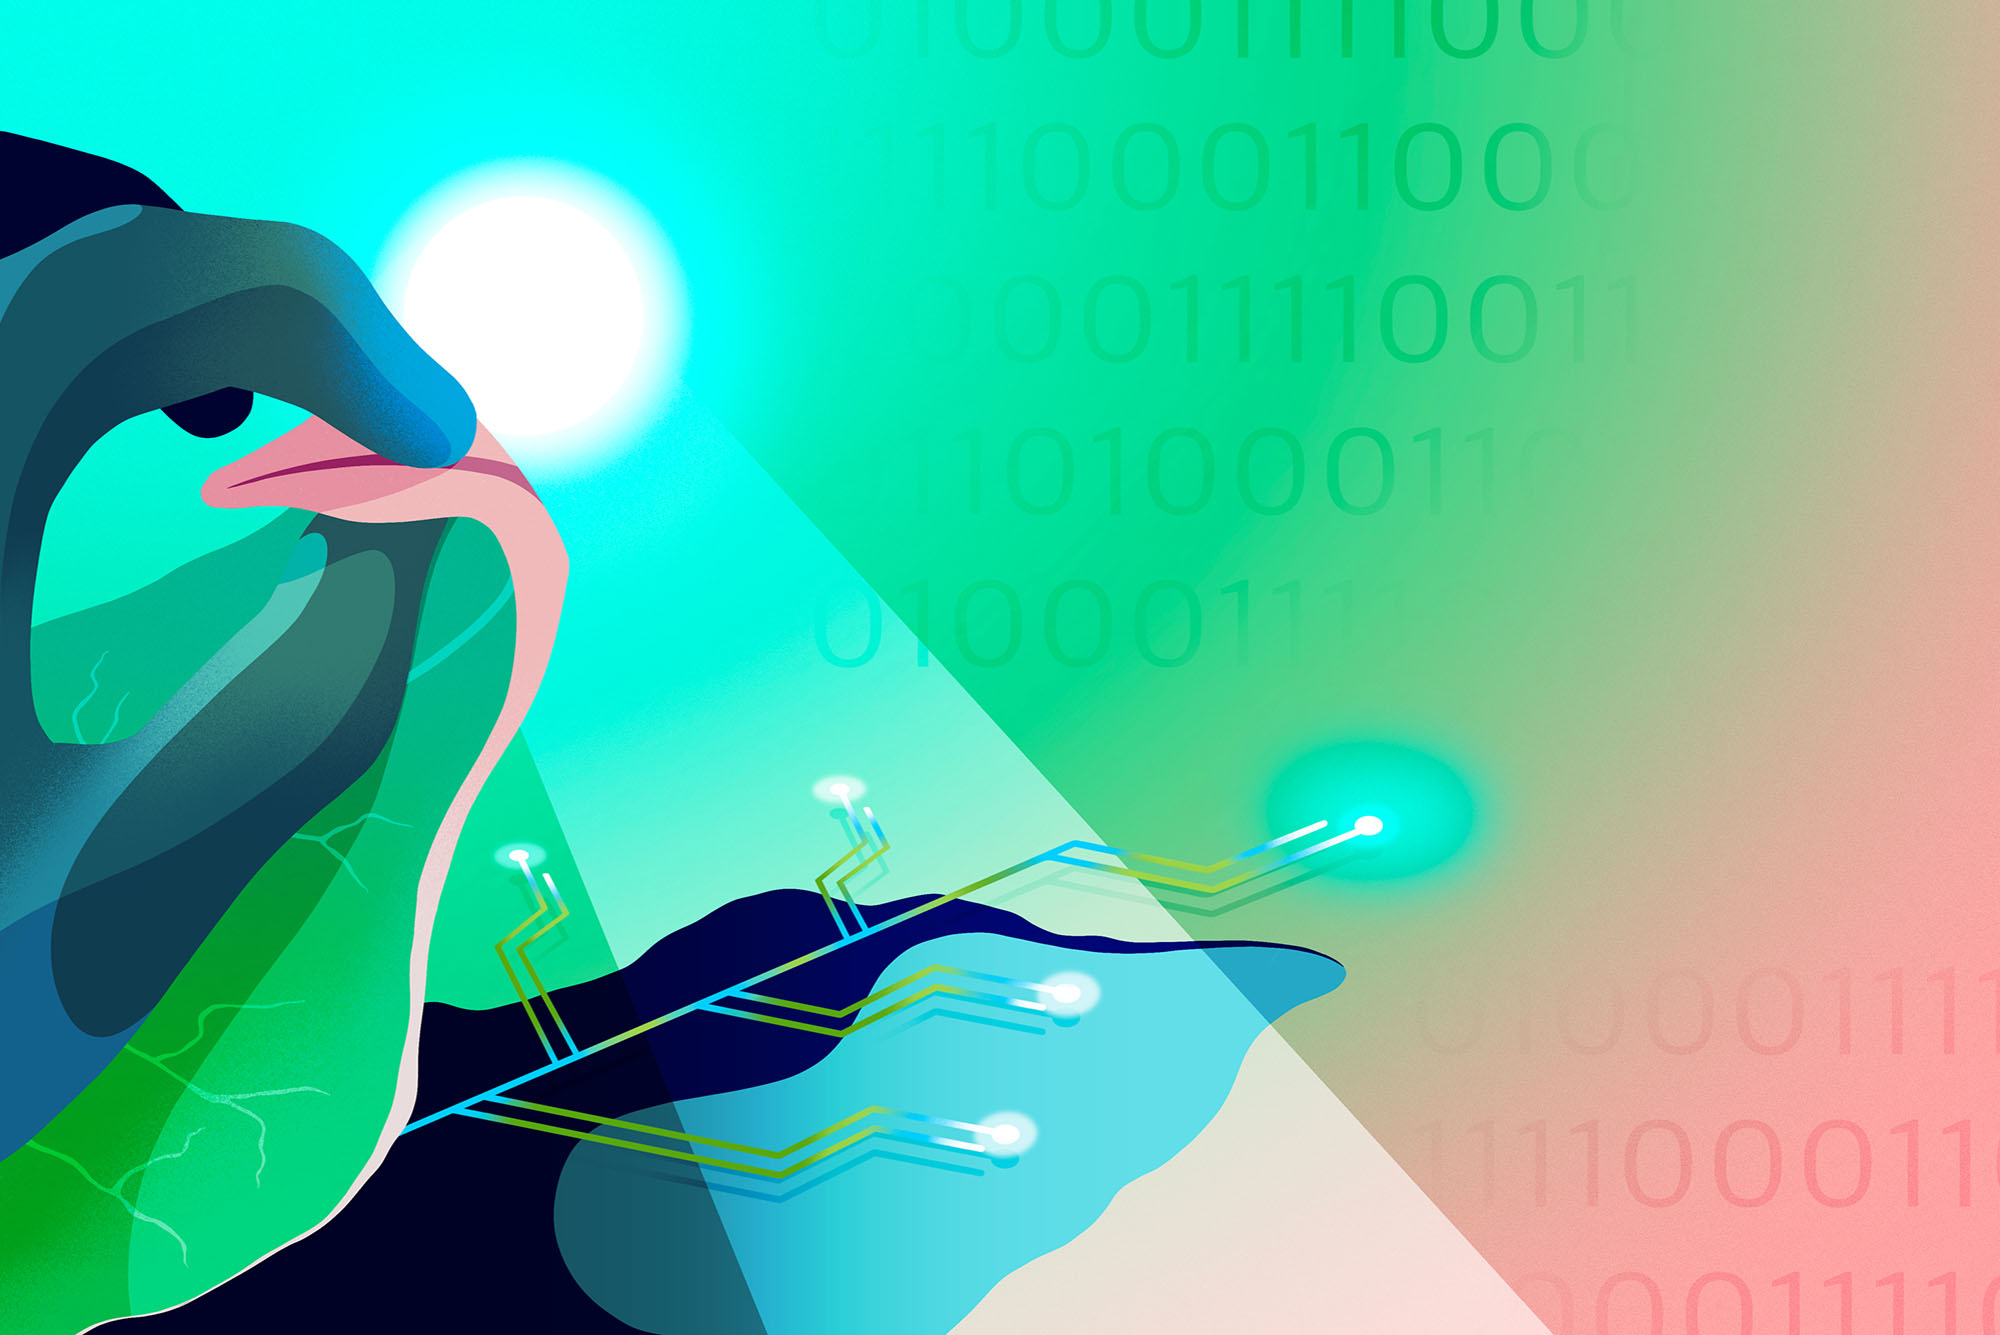 Abstract-like illustration in various shades of blue, green, pink of a hand holding a leaf. A large blue-ish hand on the left lifts a large green and pink eaf to reveal a green computer-like network. Background of image shows faded rows of binary language (zero's and one's).